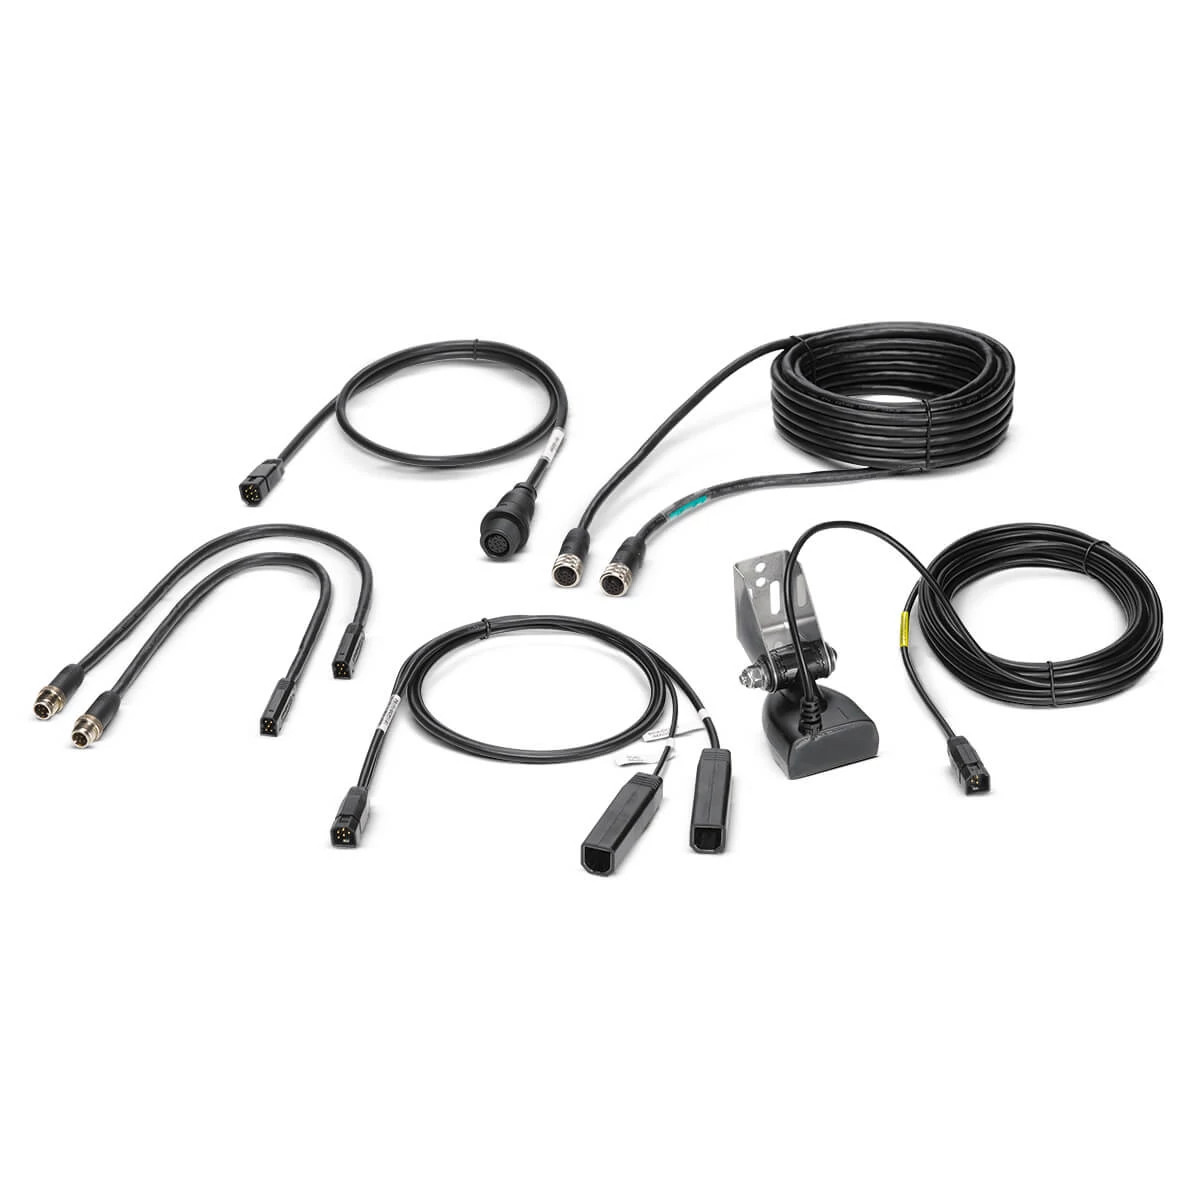 Humminbird Fishfinder Quick Release Mount and Hummingbird Power Cable for sale online 